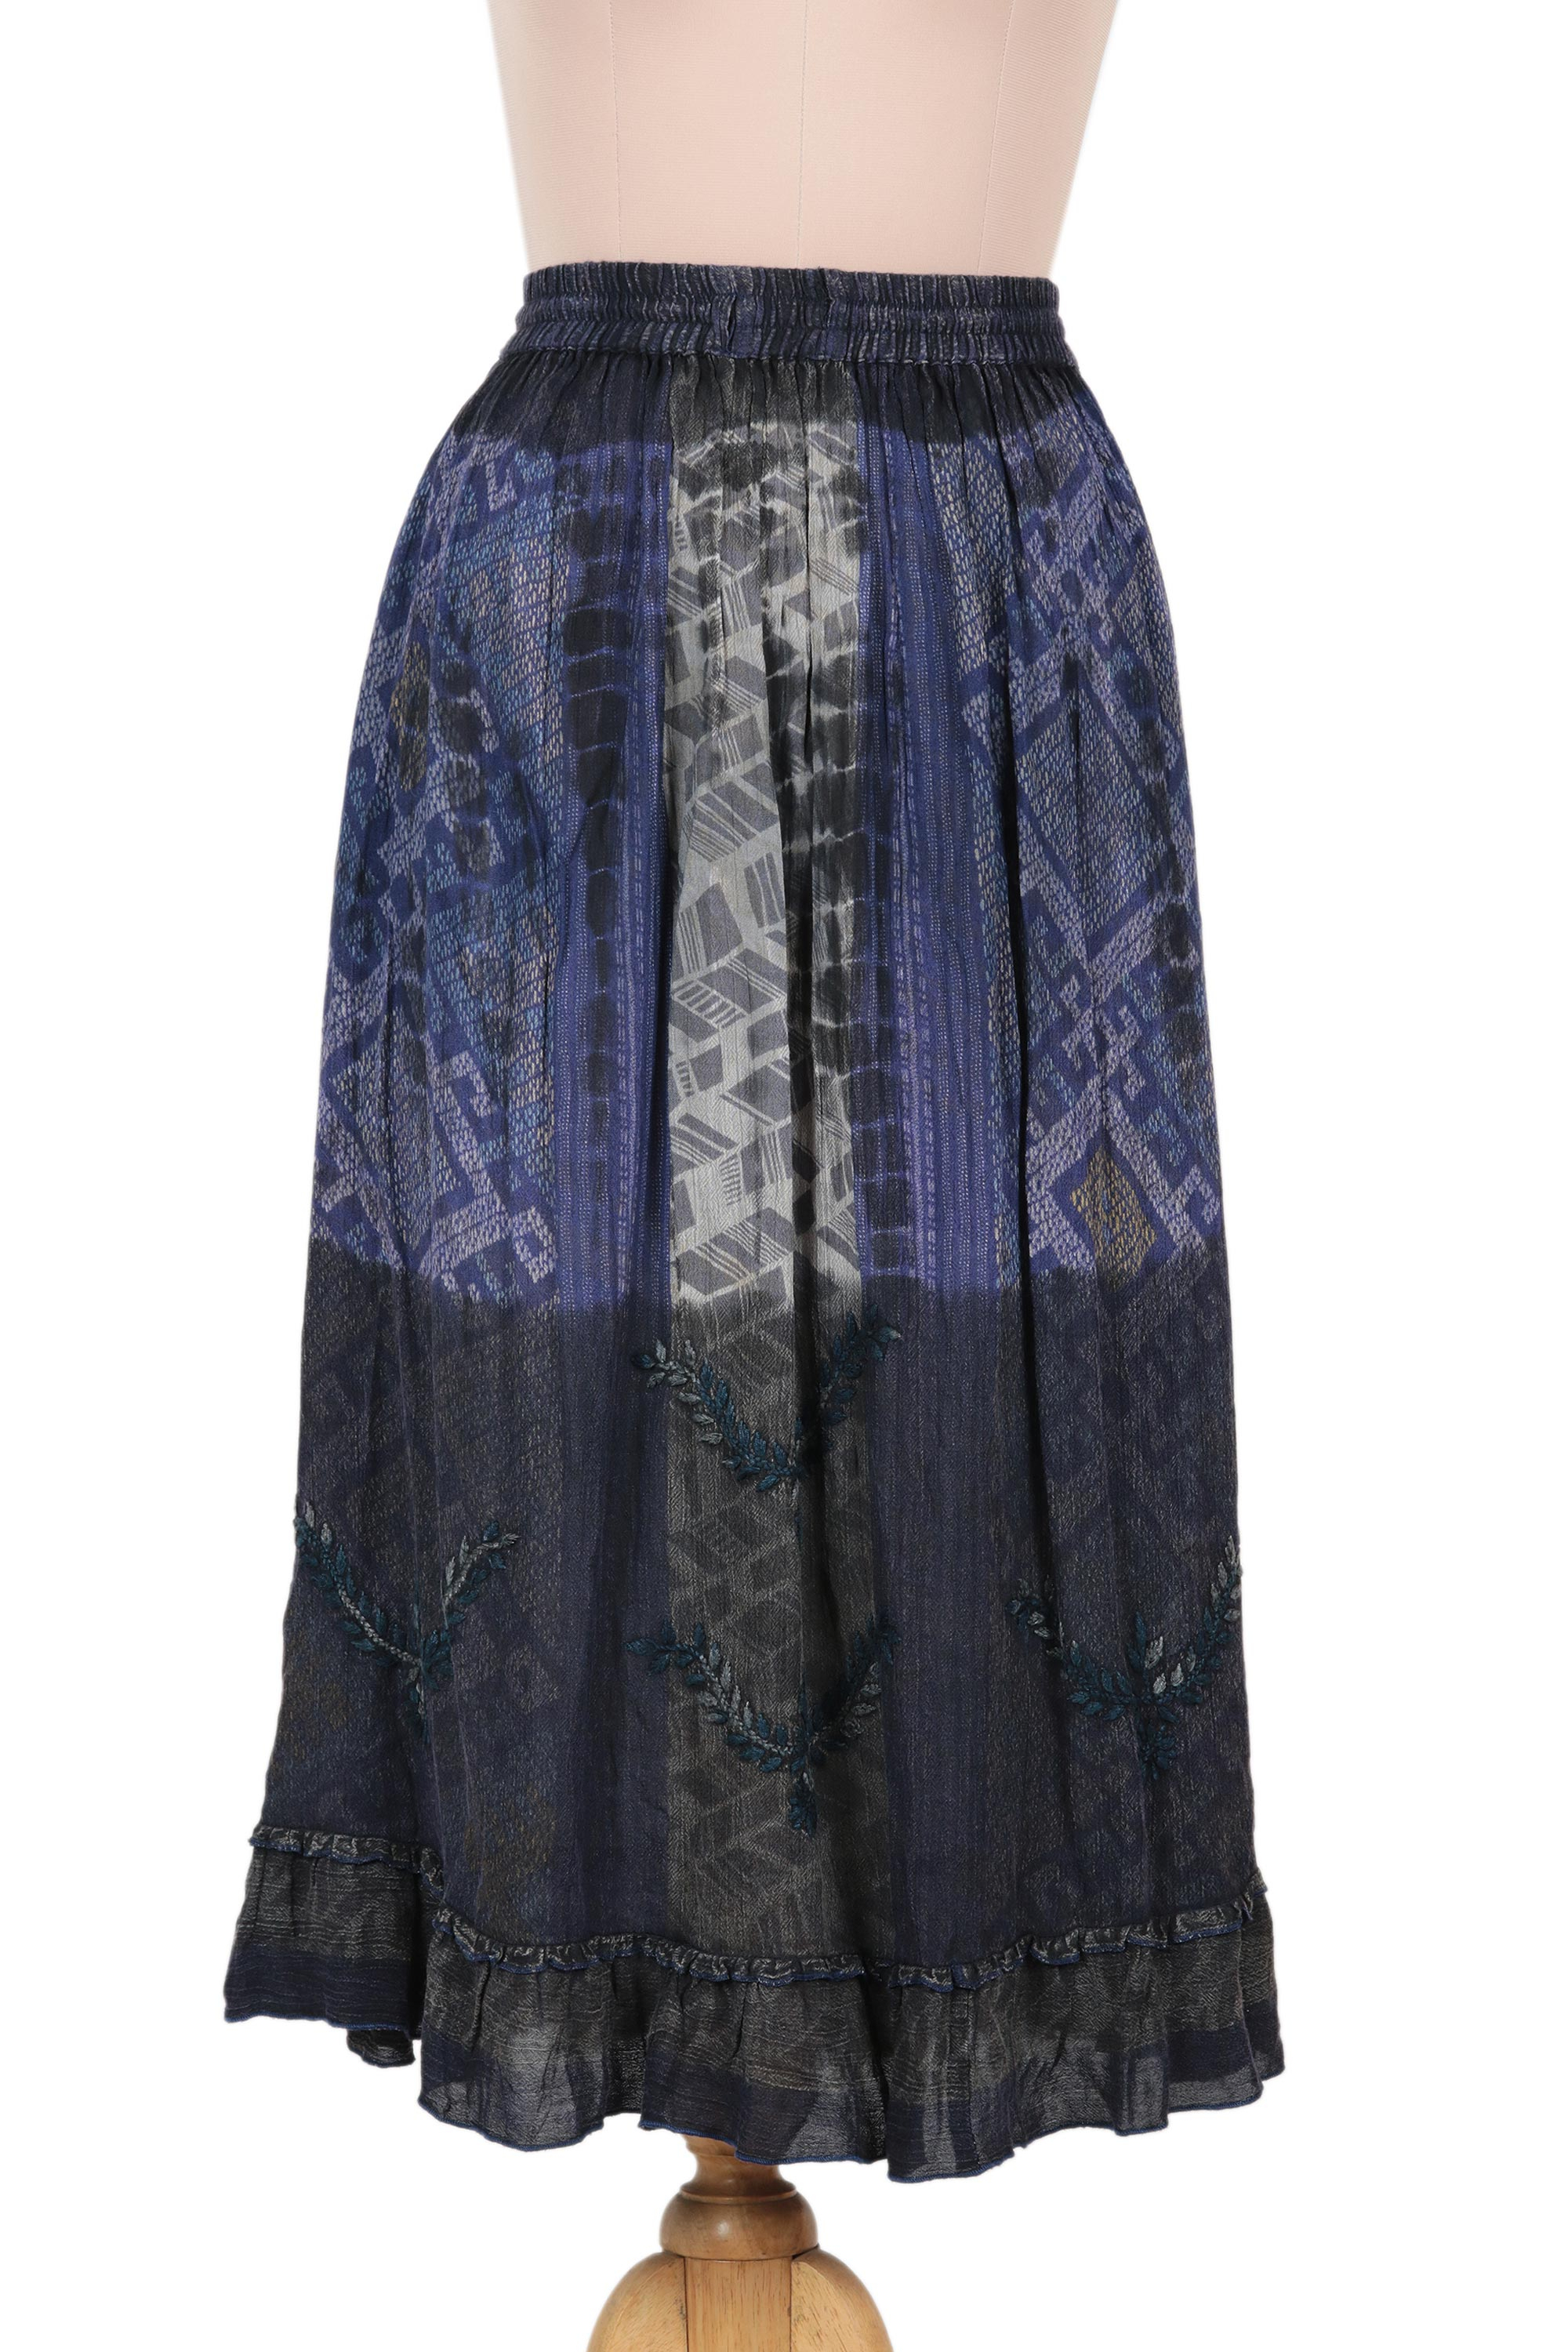 UNICEF Market | Embroidered Rayon Print Peasant Skirt in Blue and Grey ...